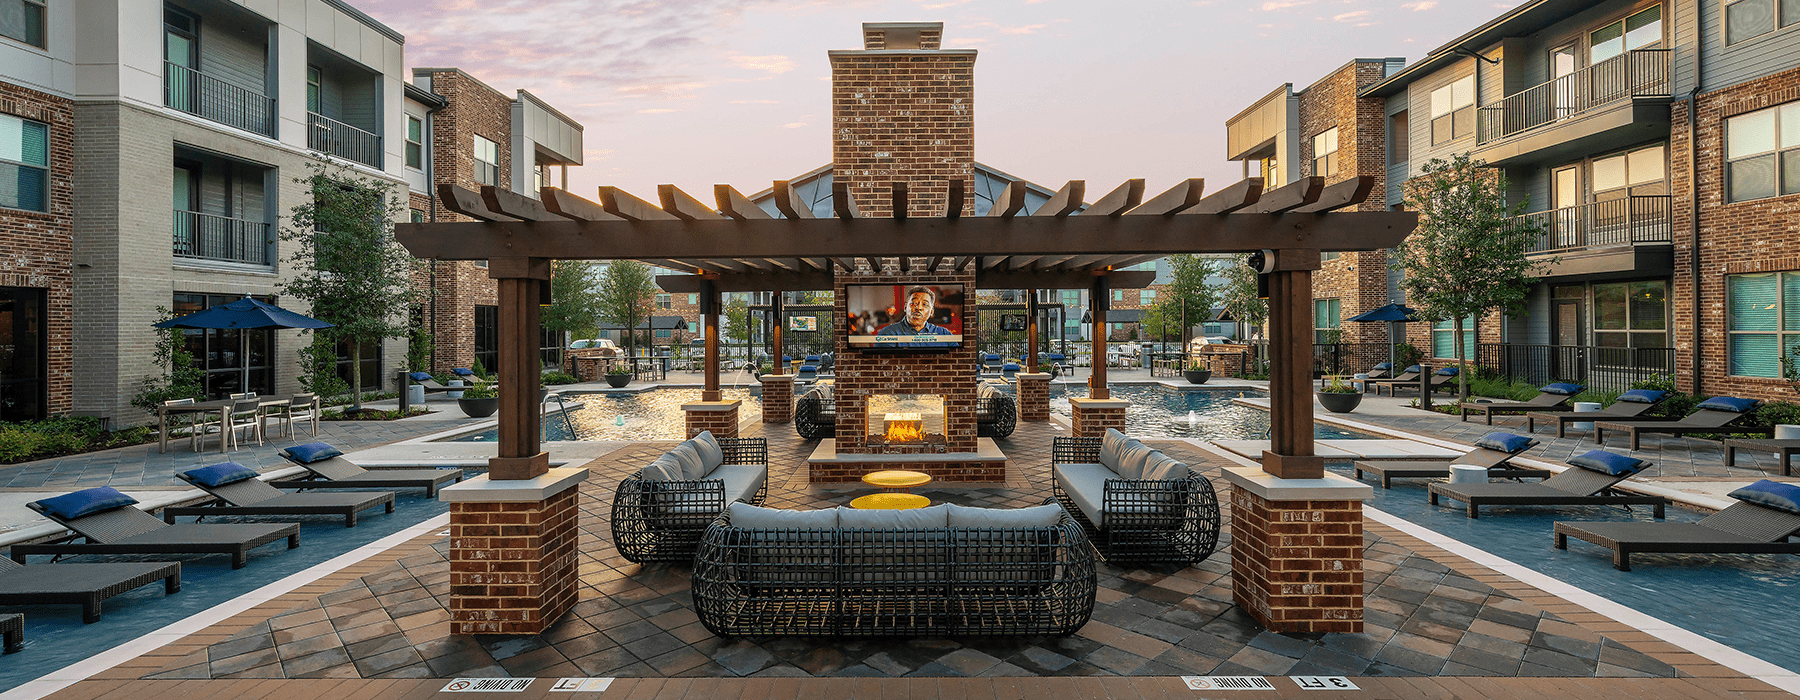 outdoor area with firepits, seating for relaxing and open spaces